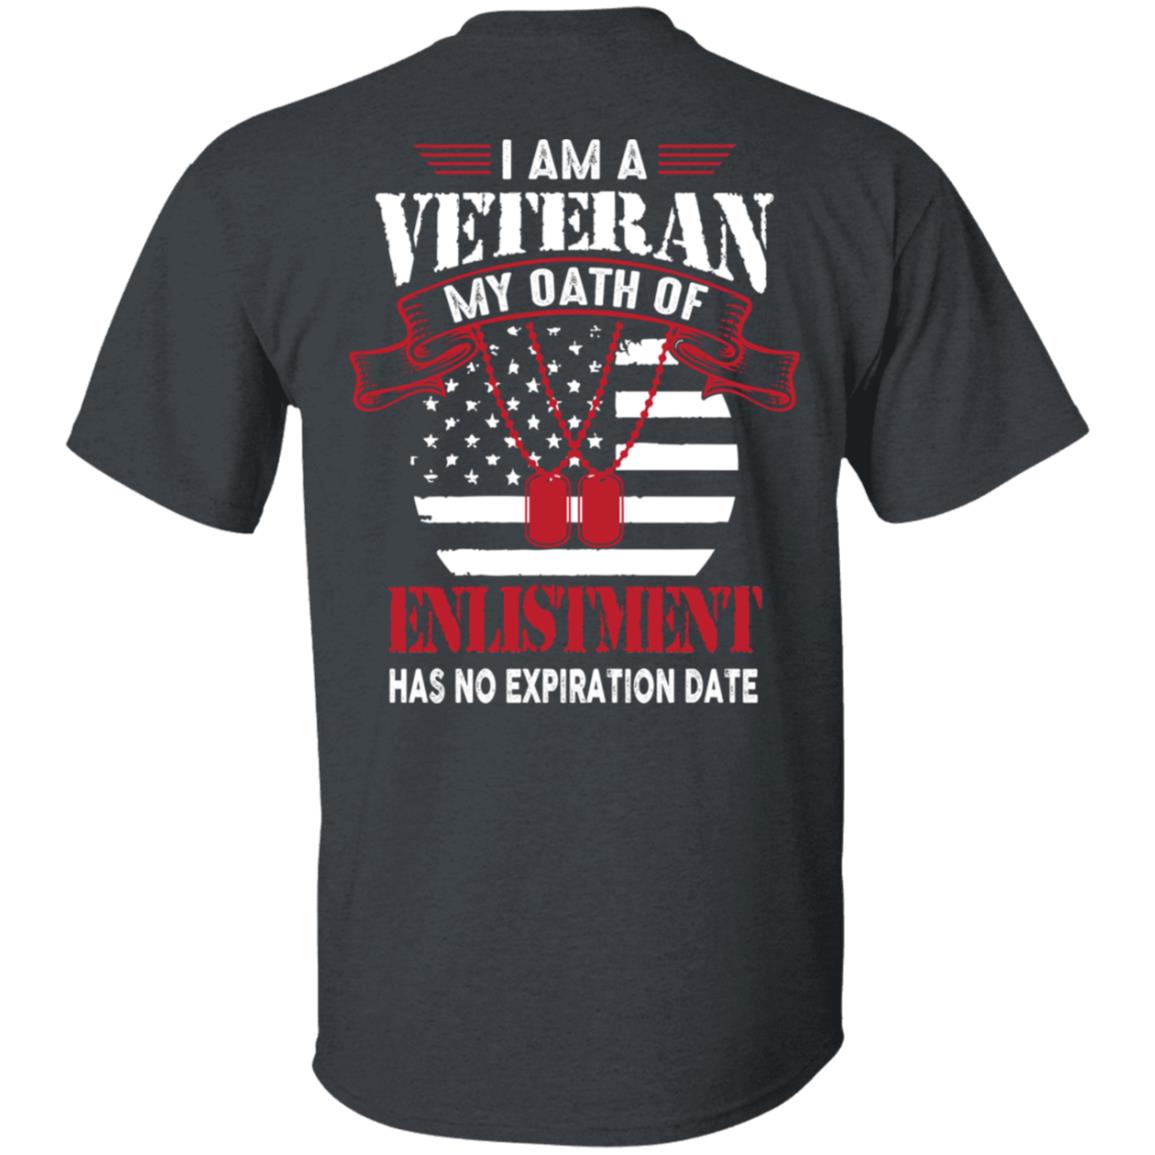 My Oath of Enlistment No Expiration Date US Veteran Shirt